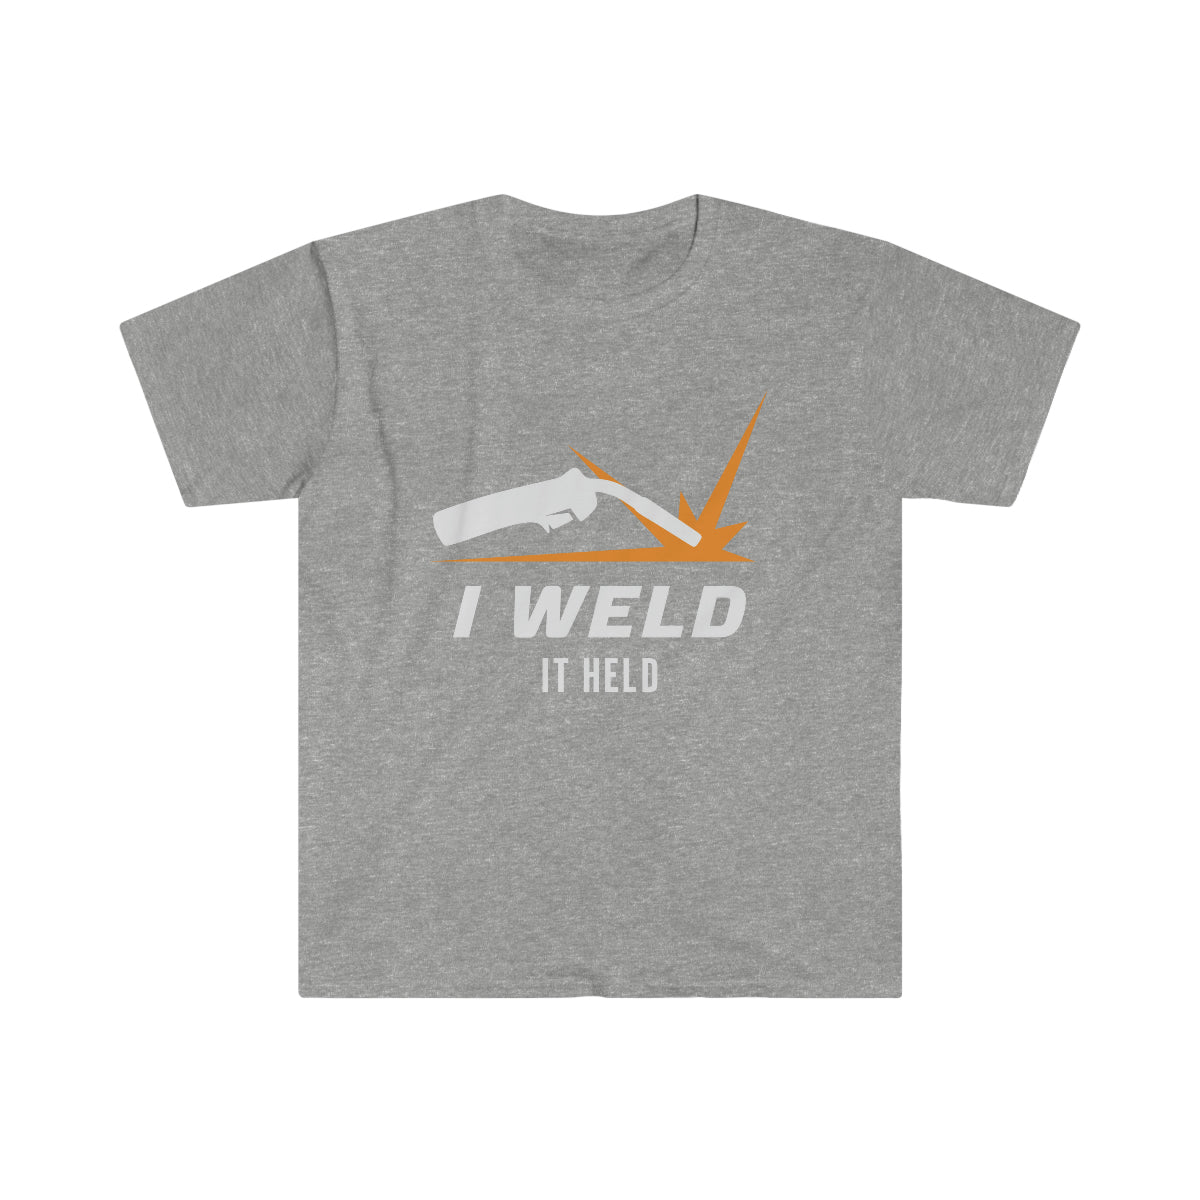 I Weld. It Held - T-shirt - MOVE Bumpers - Gray